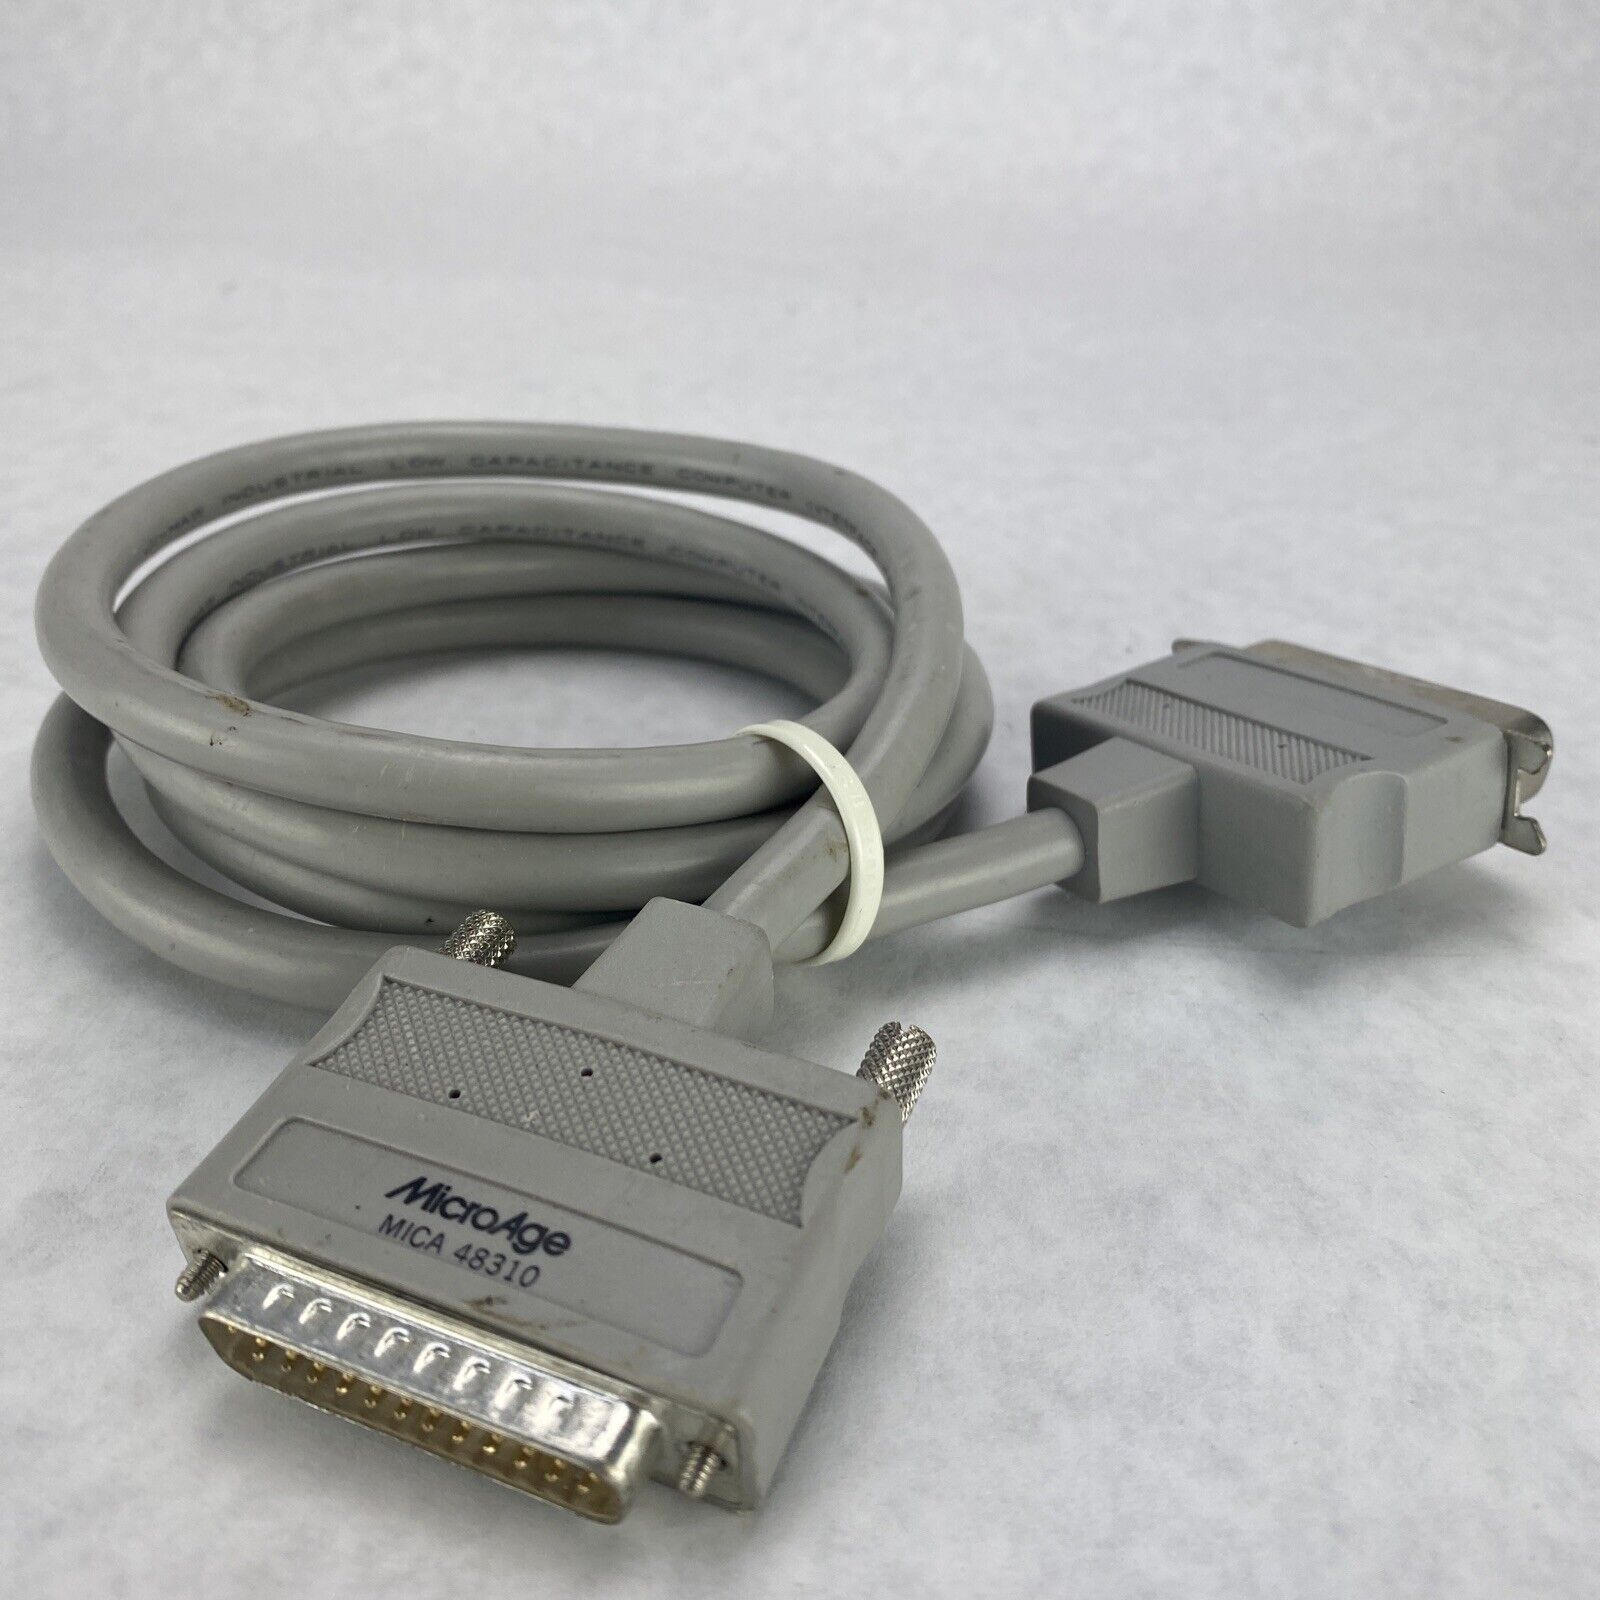 MicroAge MICA 48310 Parallel 25pin to Centronics 36pin